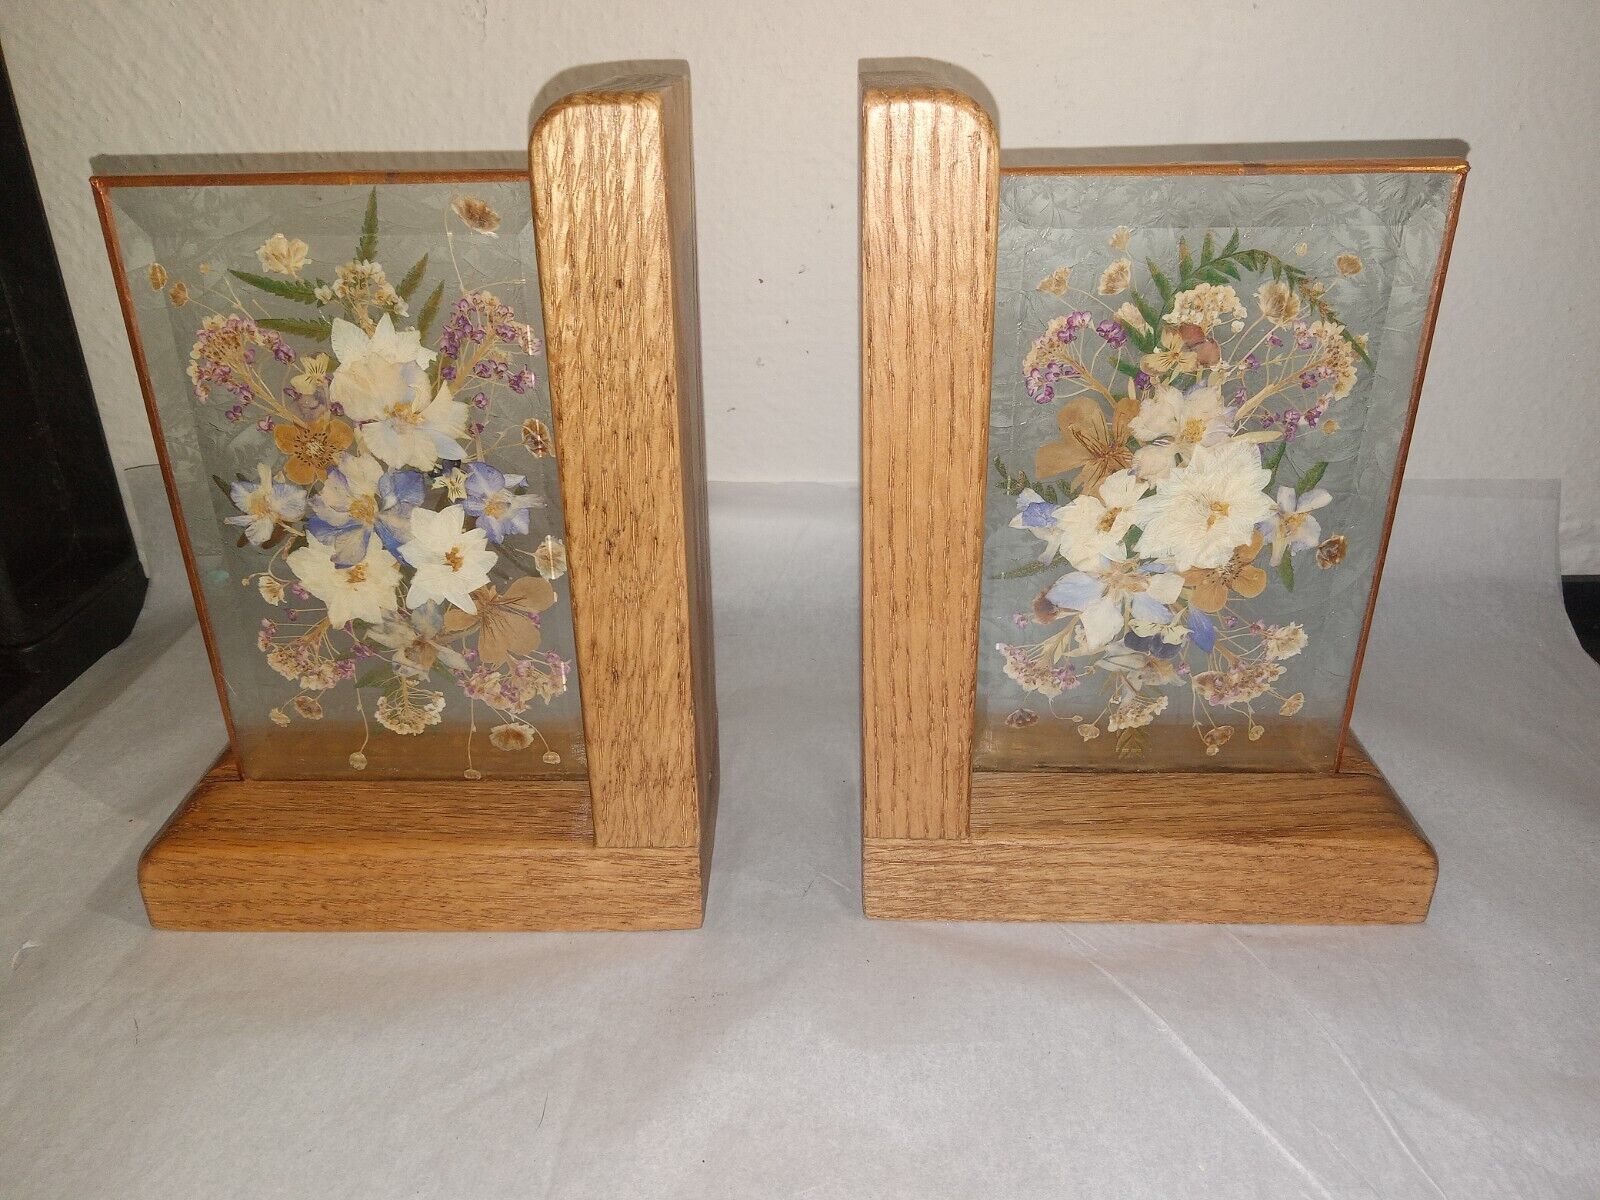 Beautiful Pressed Flower Glass and Wood Book Ends